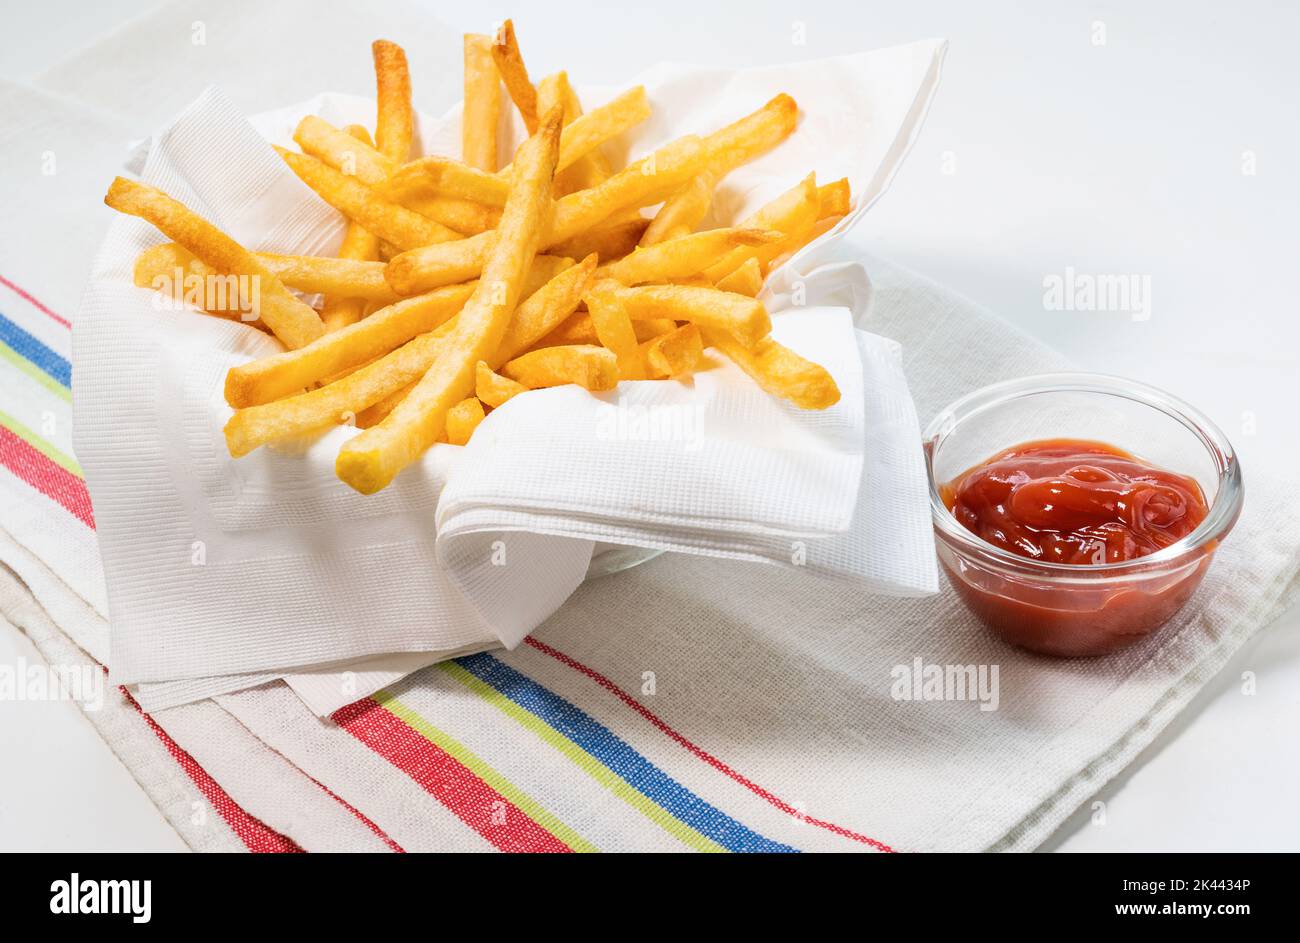 French fries with cup of ketchup Stock Photo